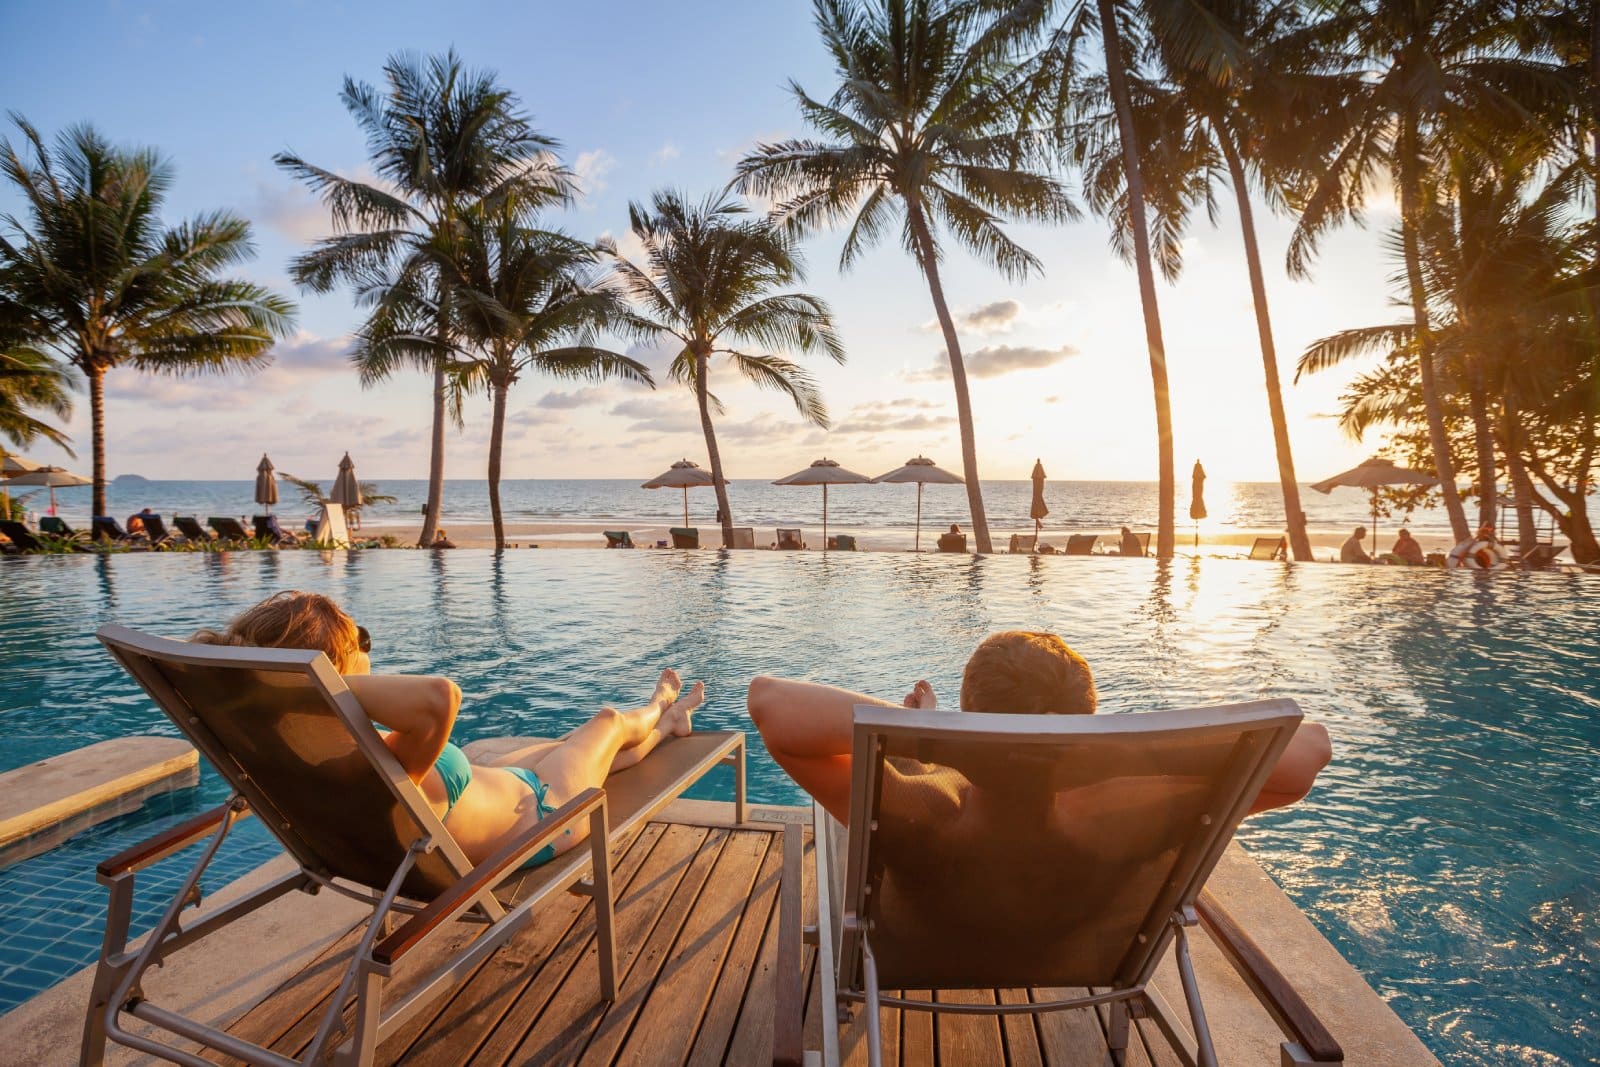 <p class="wp-caption-text">Image Credit: Shutterstock / Song_about_summer</p>  <p><span>Unlike many Americans who often leave vacation days on the table, Europeans like the Italians make full use of their holiday entitlements, sometimes taking the entire month of August off. This extended break is key to reducing burnout, refreshing the mind, and fostering family connections. Adopting a similar approach could help Americans rejuvenate and return to work more productive and fulfilled.</span></p>